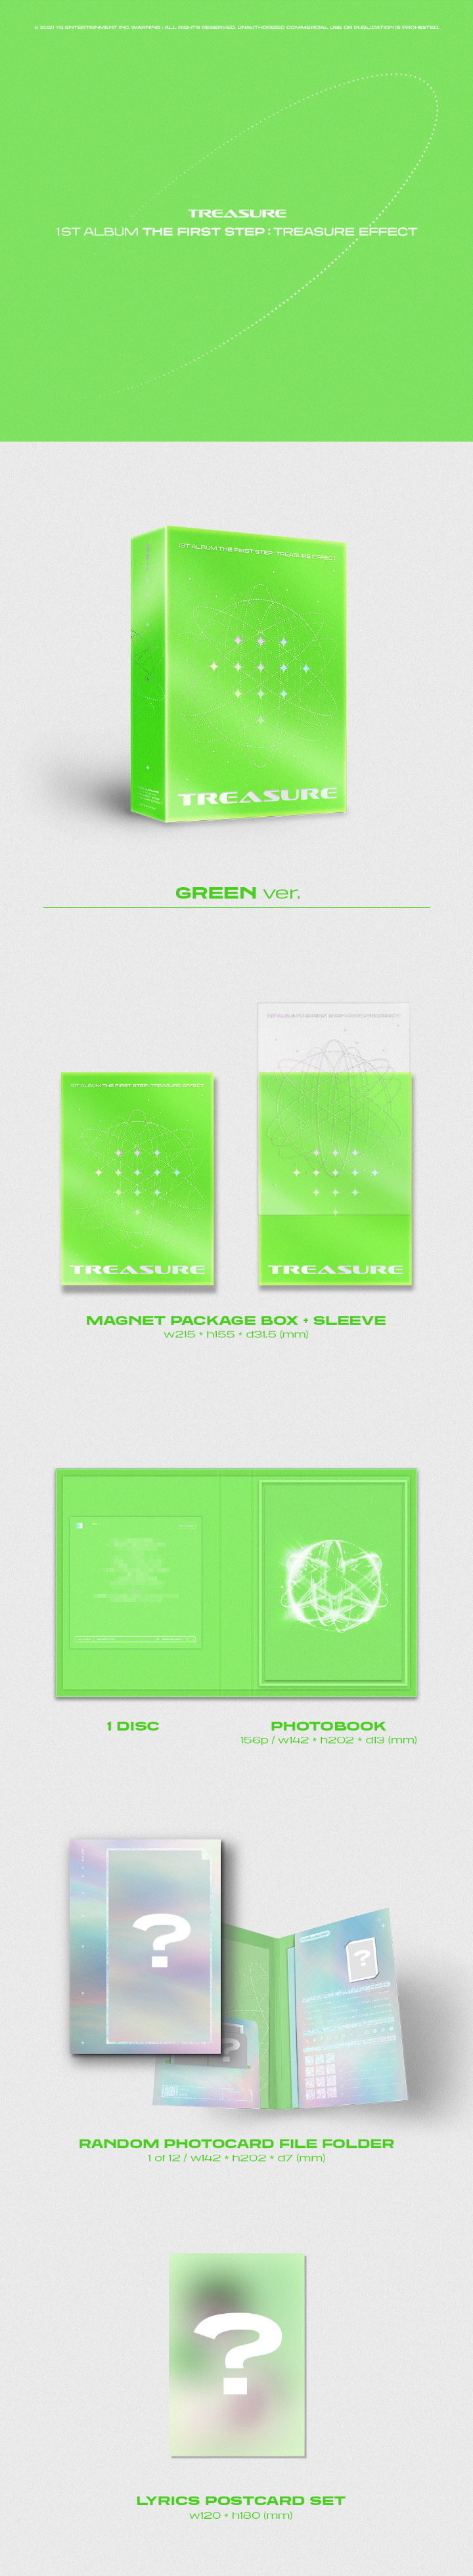 THE FIRST STEP : Treasure Effect Folded Treasure 1st Album Incl Pre-order Benefits : Find Treasure Scratch Card, AR Photocard, AR Photo board, Double sided Poster Blue version 